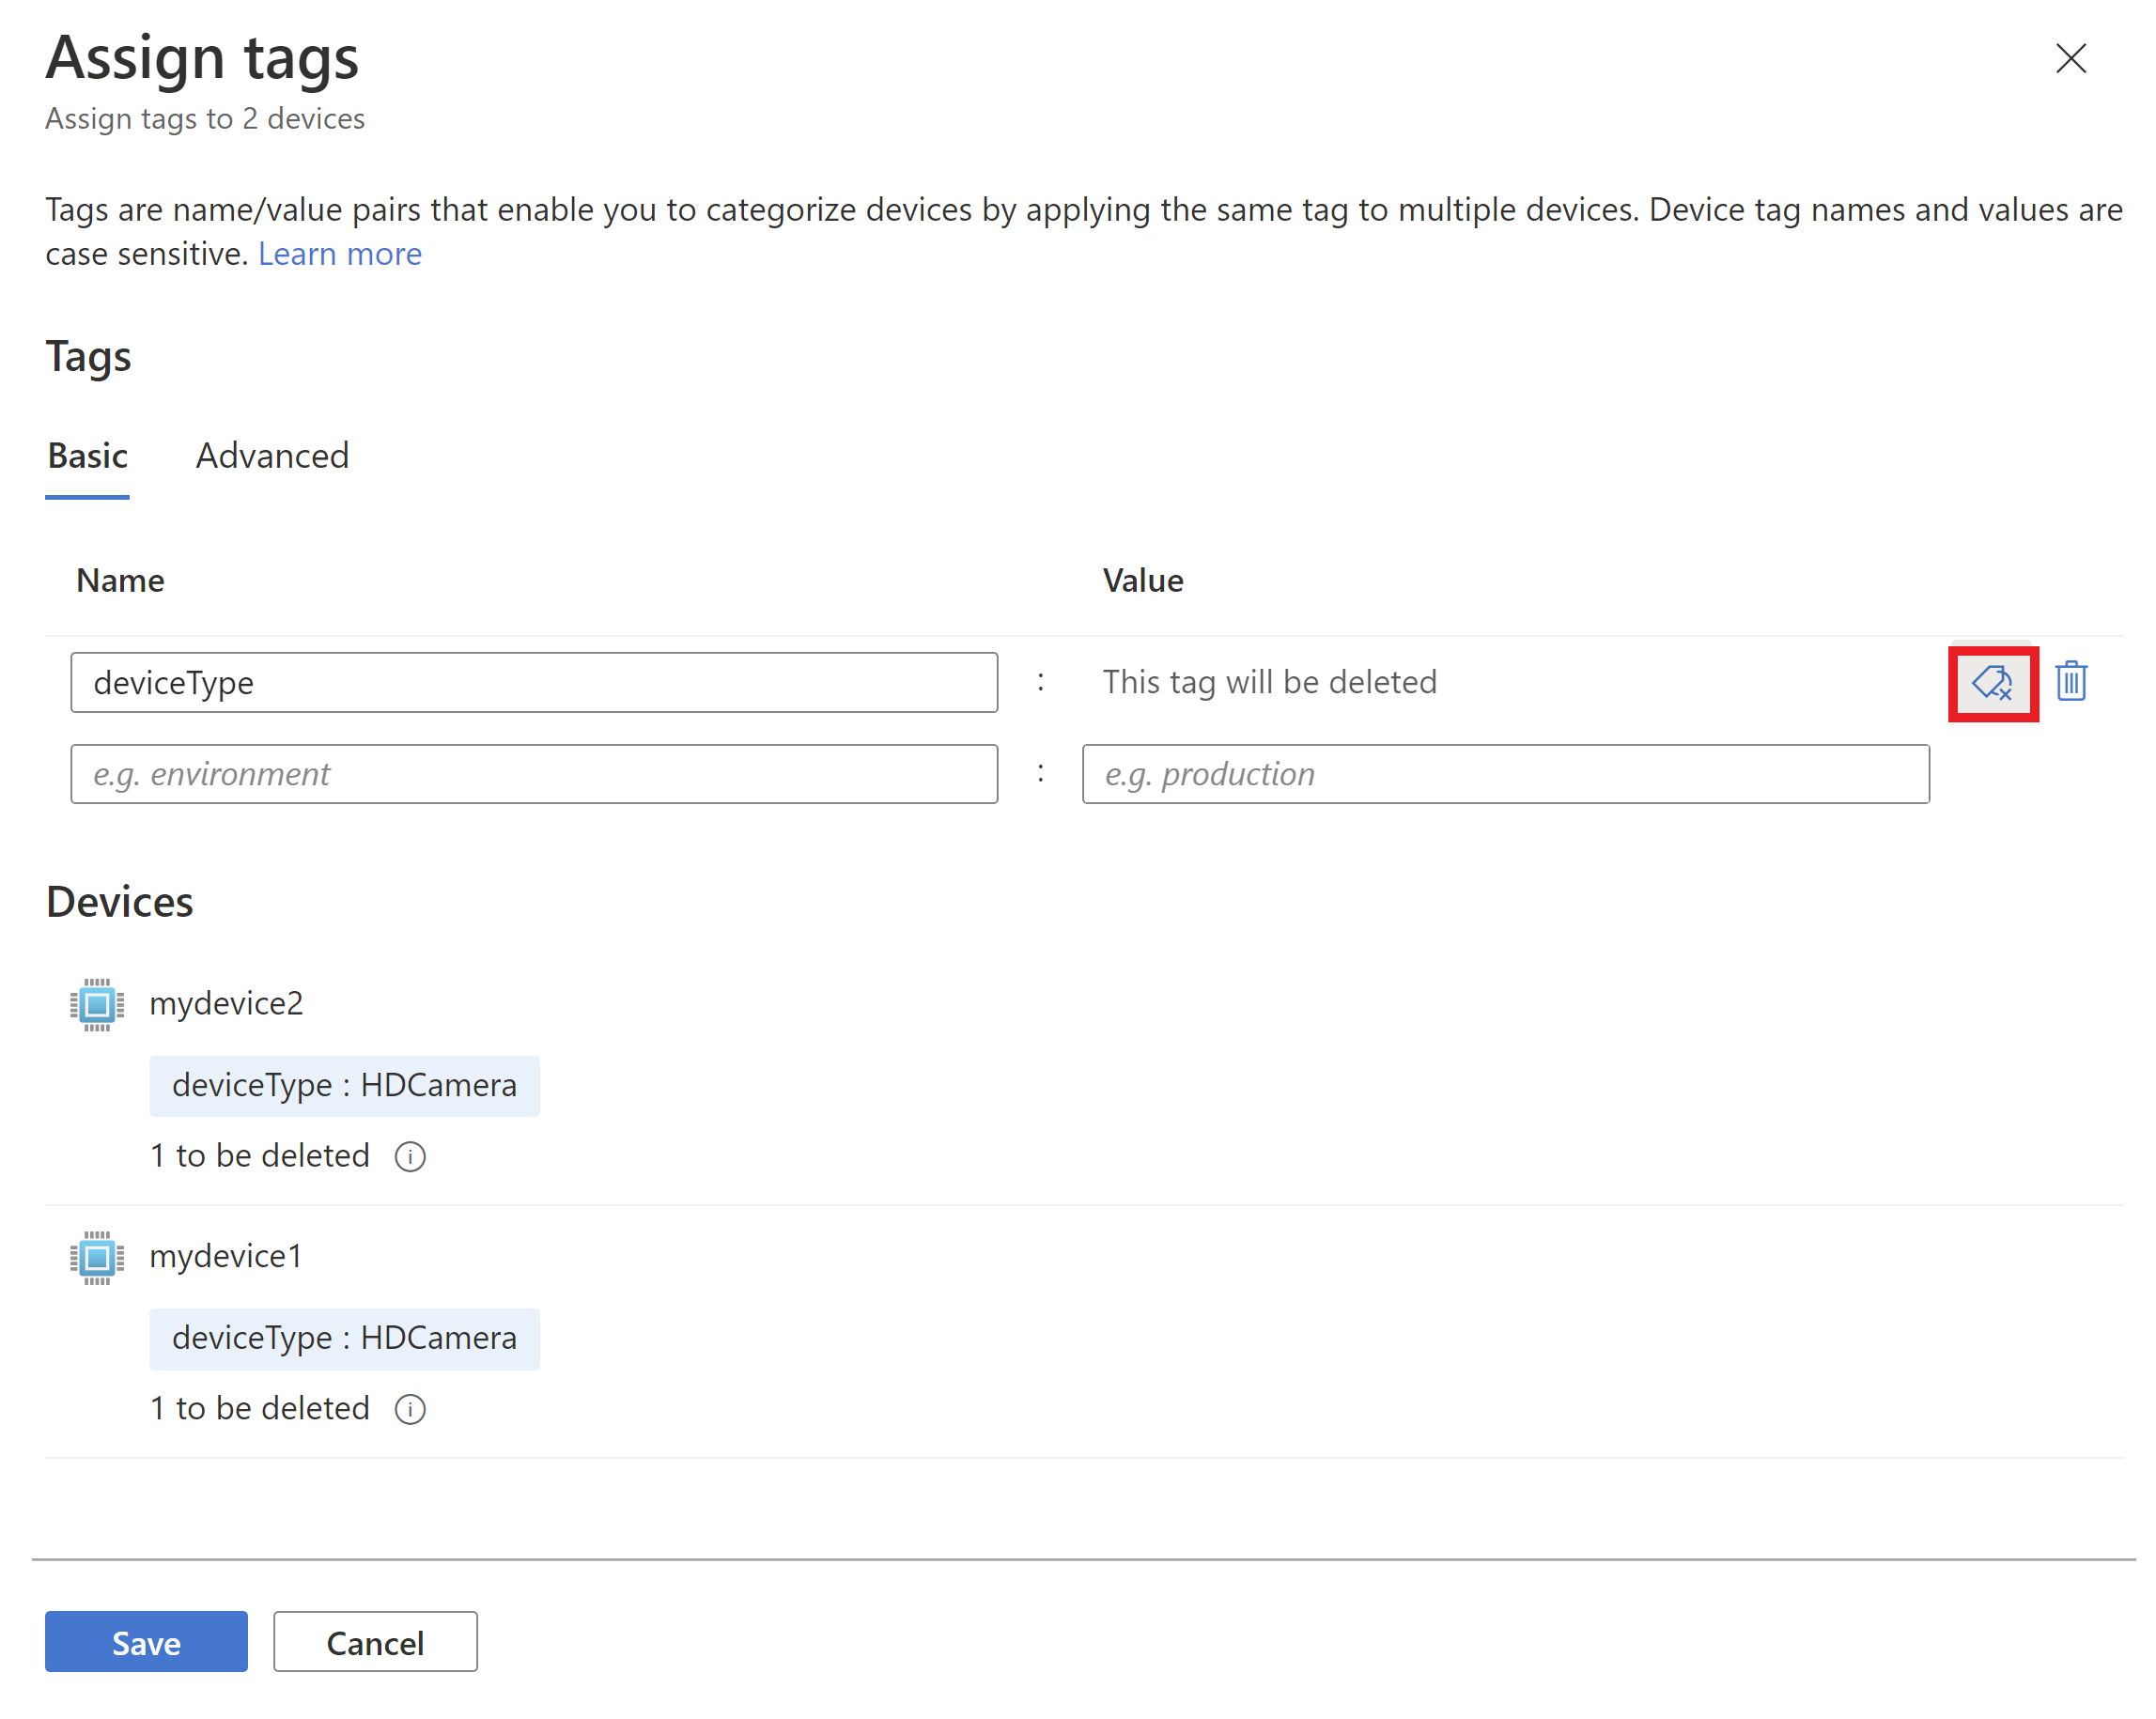 Screenshot of marking tag for deletion.